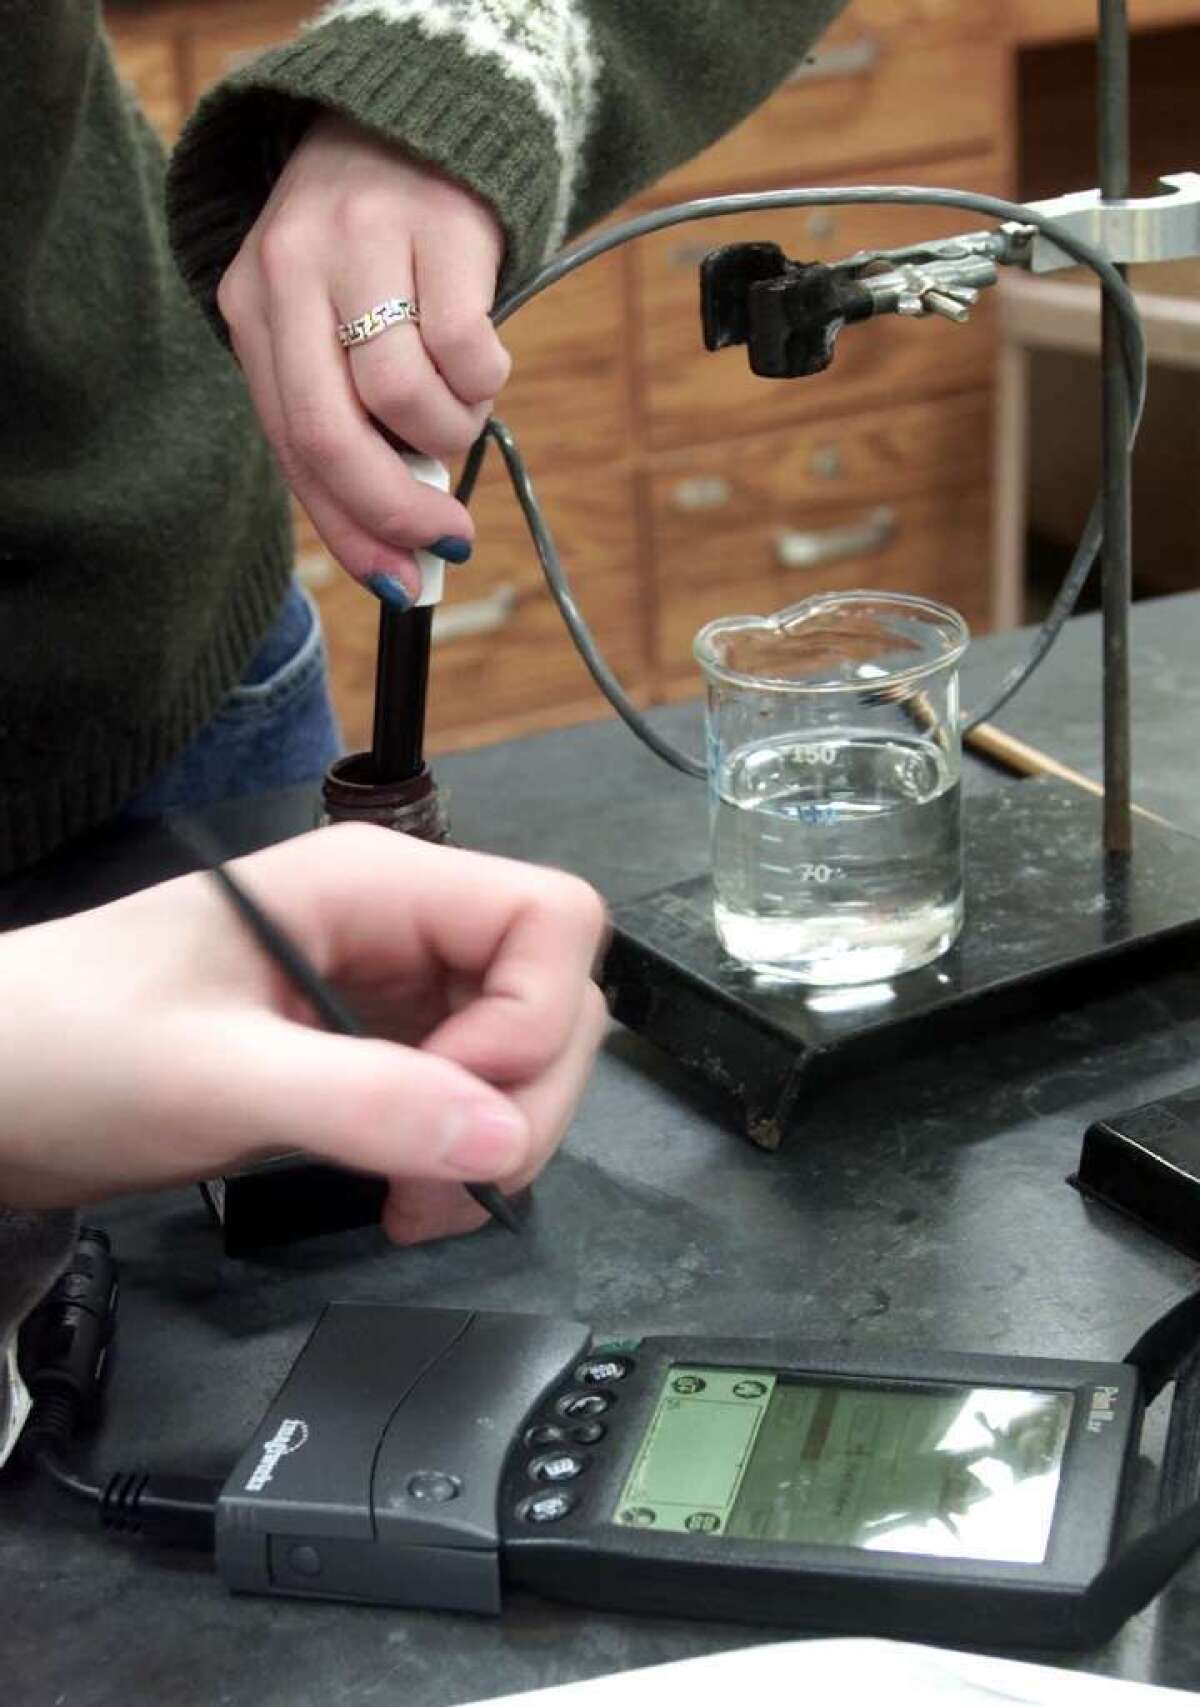 Students run an experiment in a chemistry class at an Illinois high school.